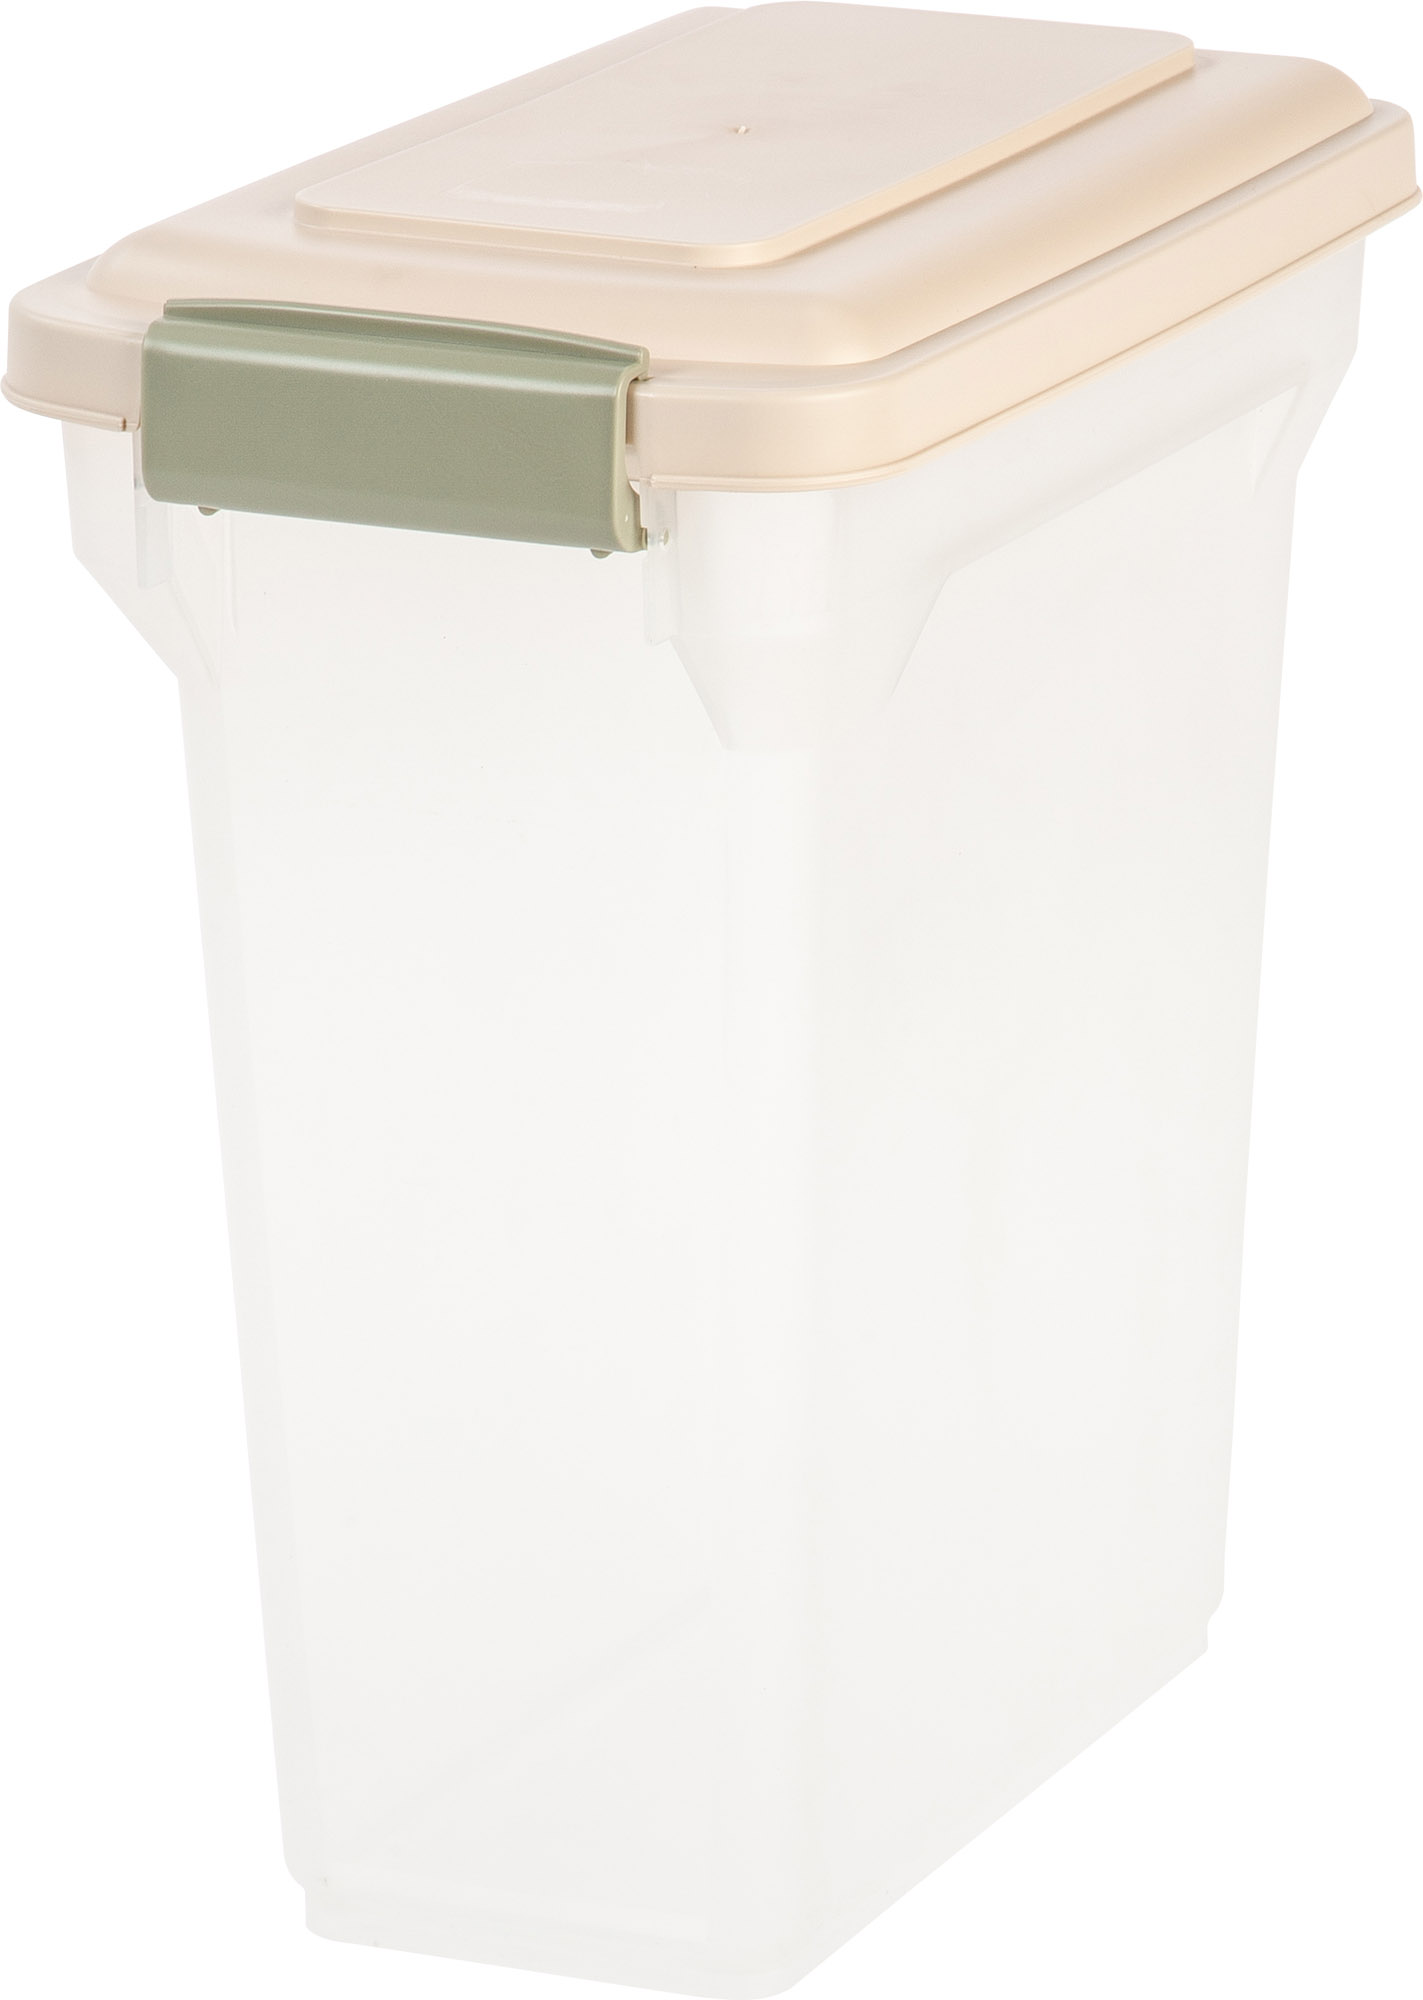 IRIS USA 13 Lbs / 15 Qt WeatherPro Airtight Pet Food Storage Container, for Dog Cat Bird and Other Pet Food Storage Bin, Pet Supplies, Keep Pests Out, Keep Fresh, BPA Free, Clear/Almond - image 1 of 5